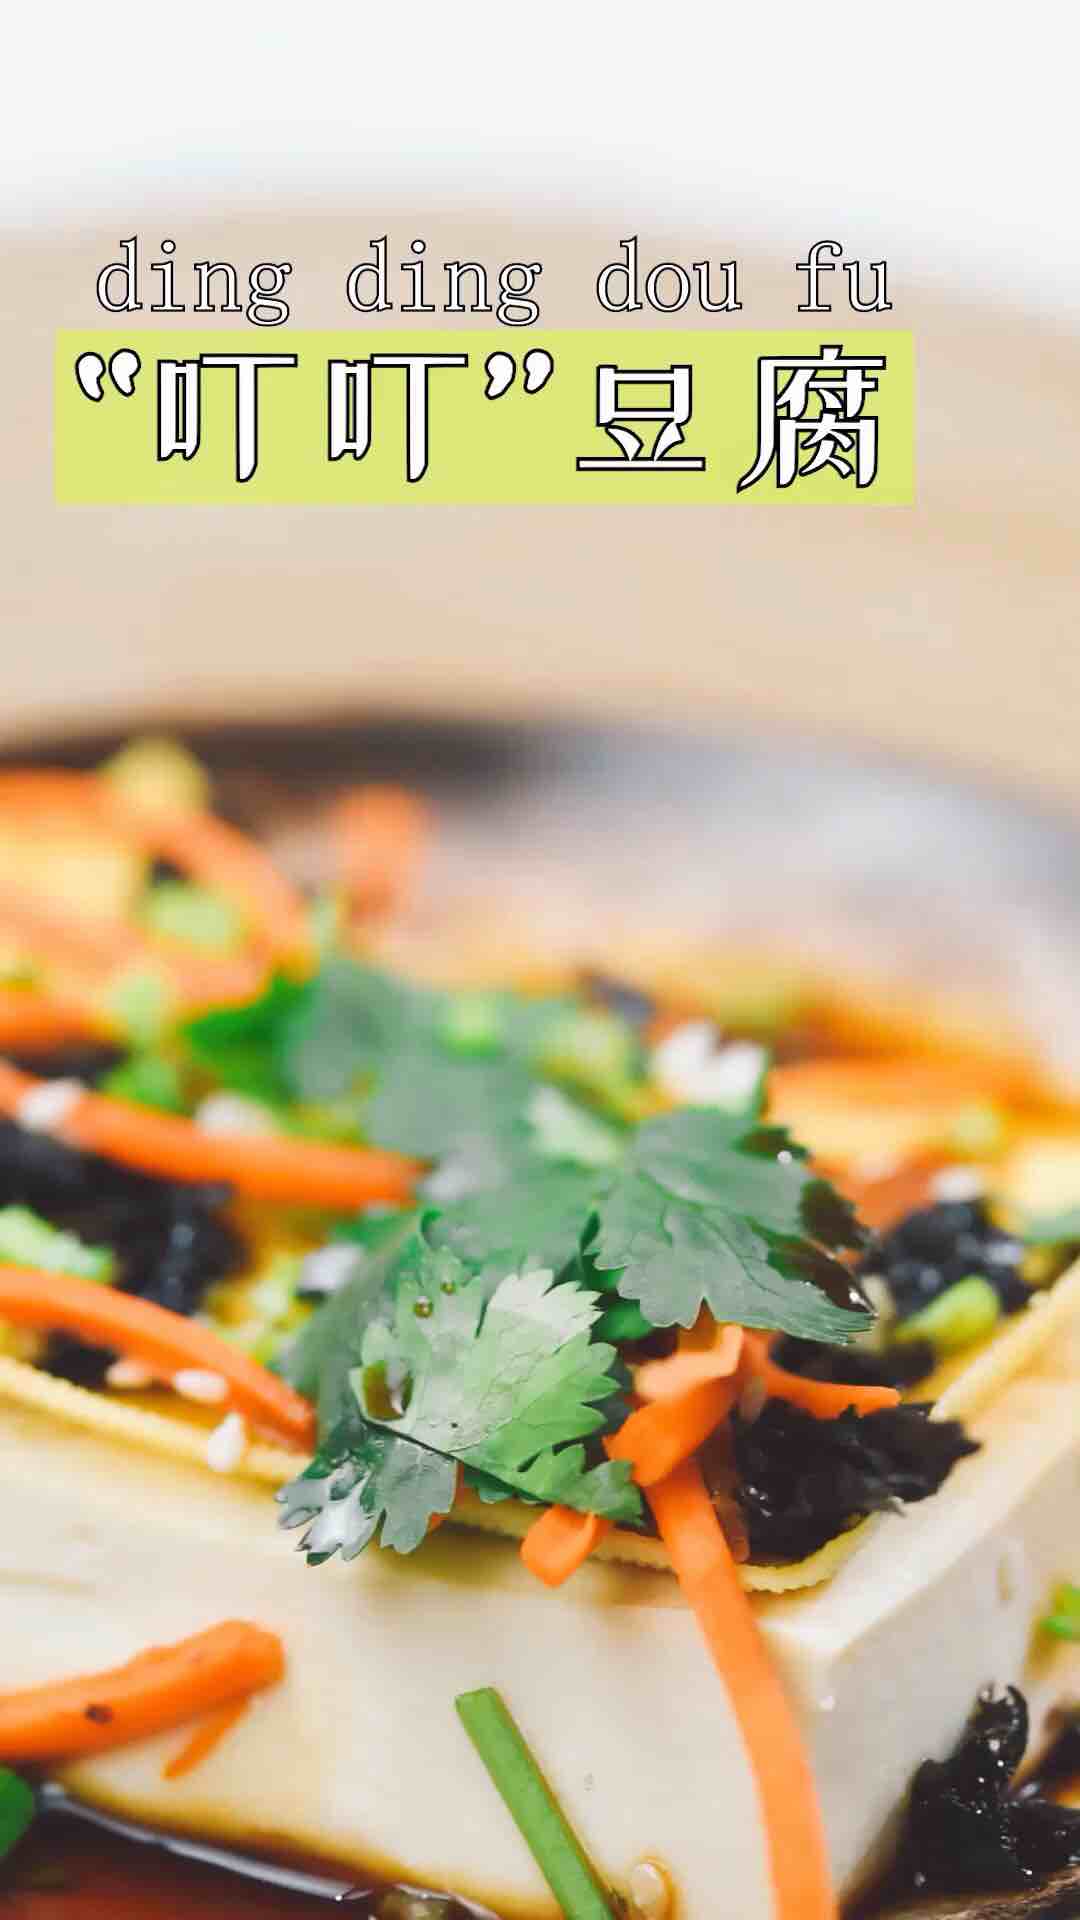 Simple and Low-calorie "dingding" Tofu